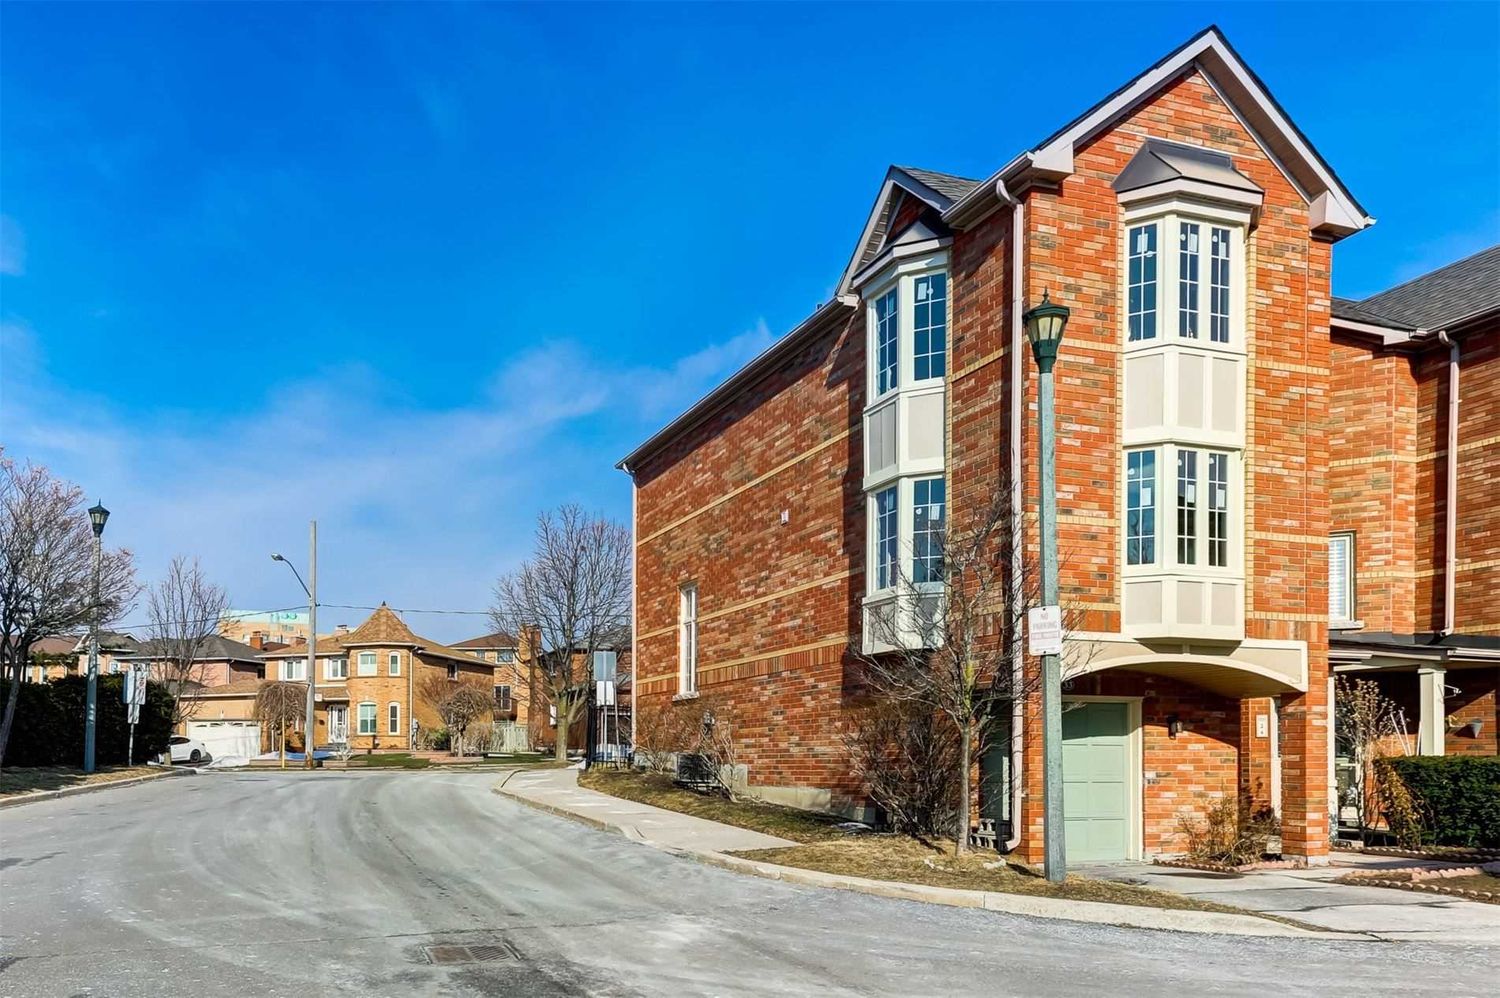 1-55 Guildpark Ptwy. 8 Cromwell Road is located in  Scarborough, Toronto - image #2 of 2